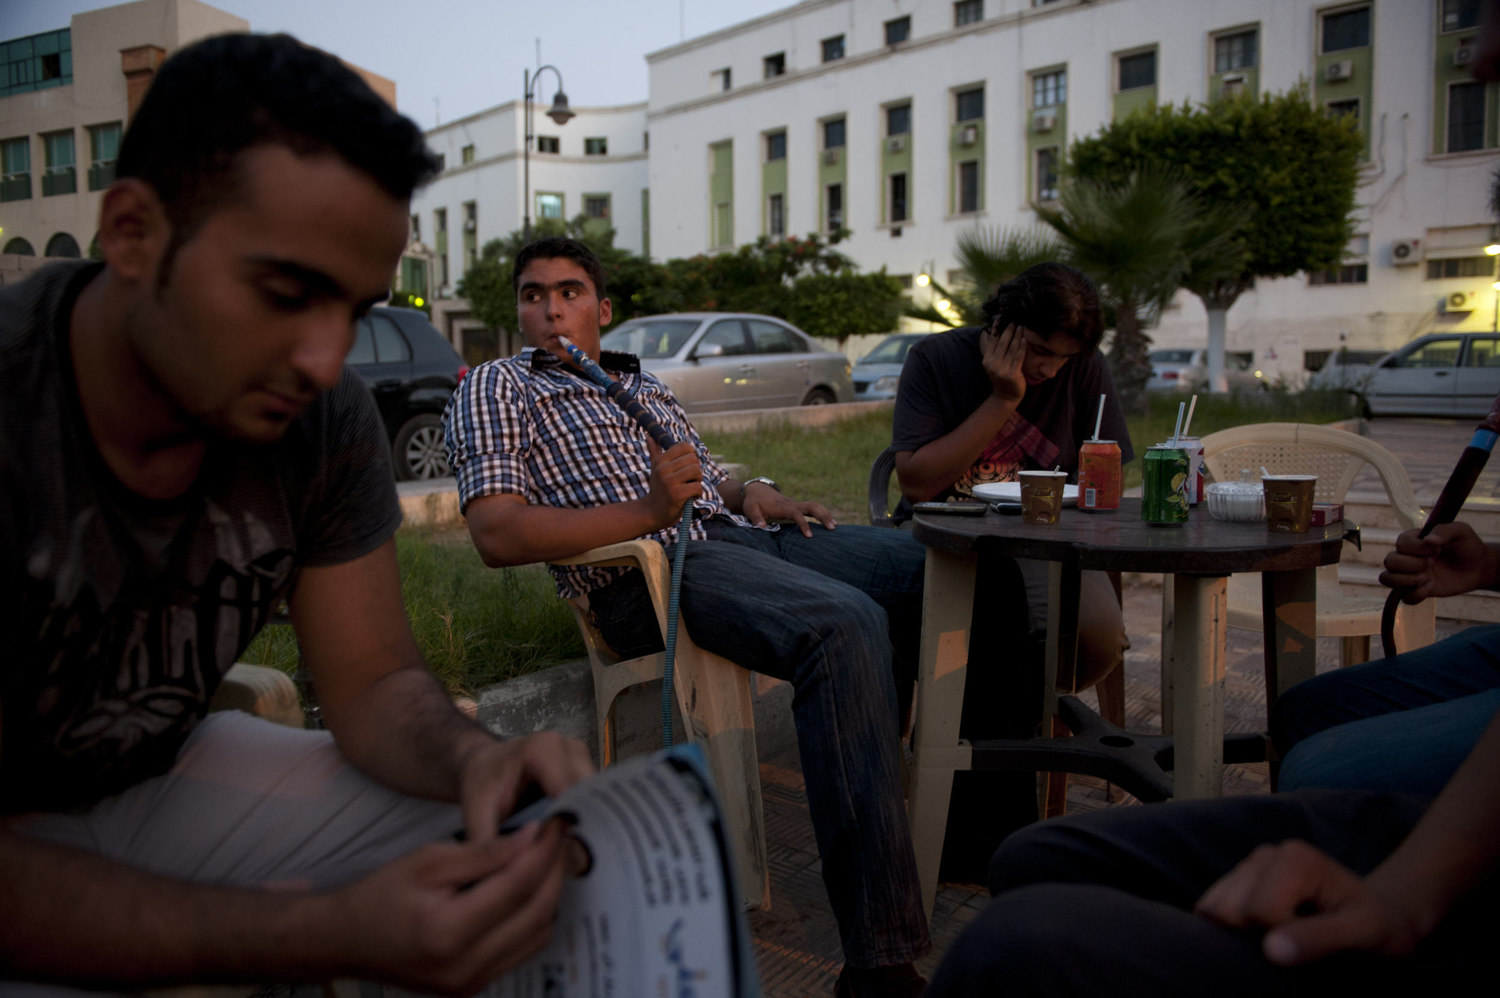  Medical students talk in a downtown cafe on July 10th, 2012 in Tripoli, Libya.
 